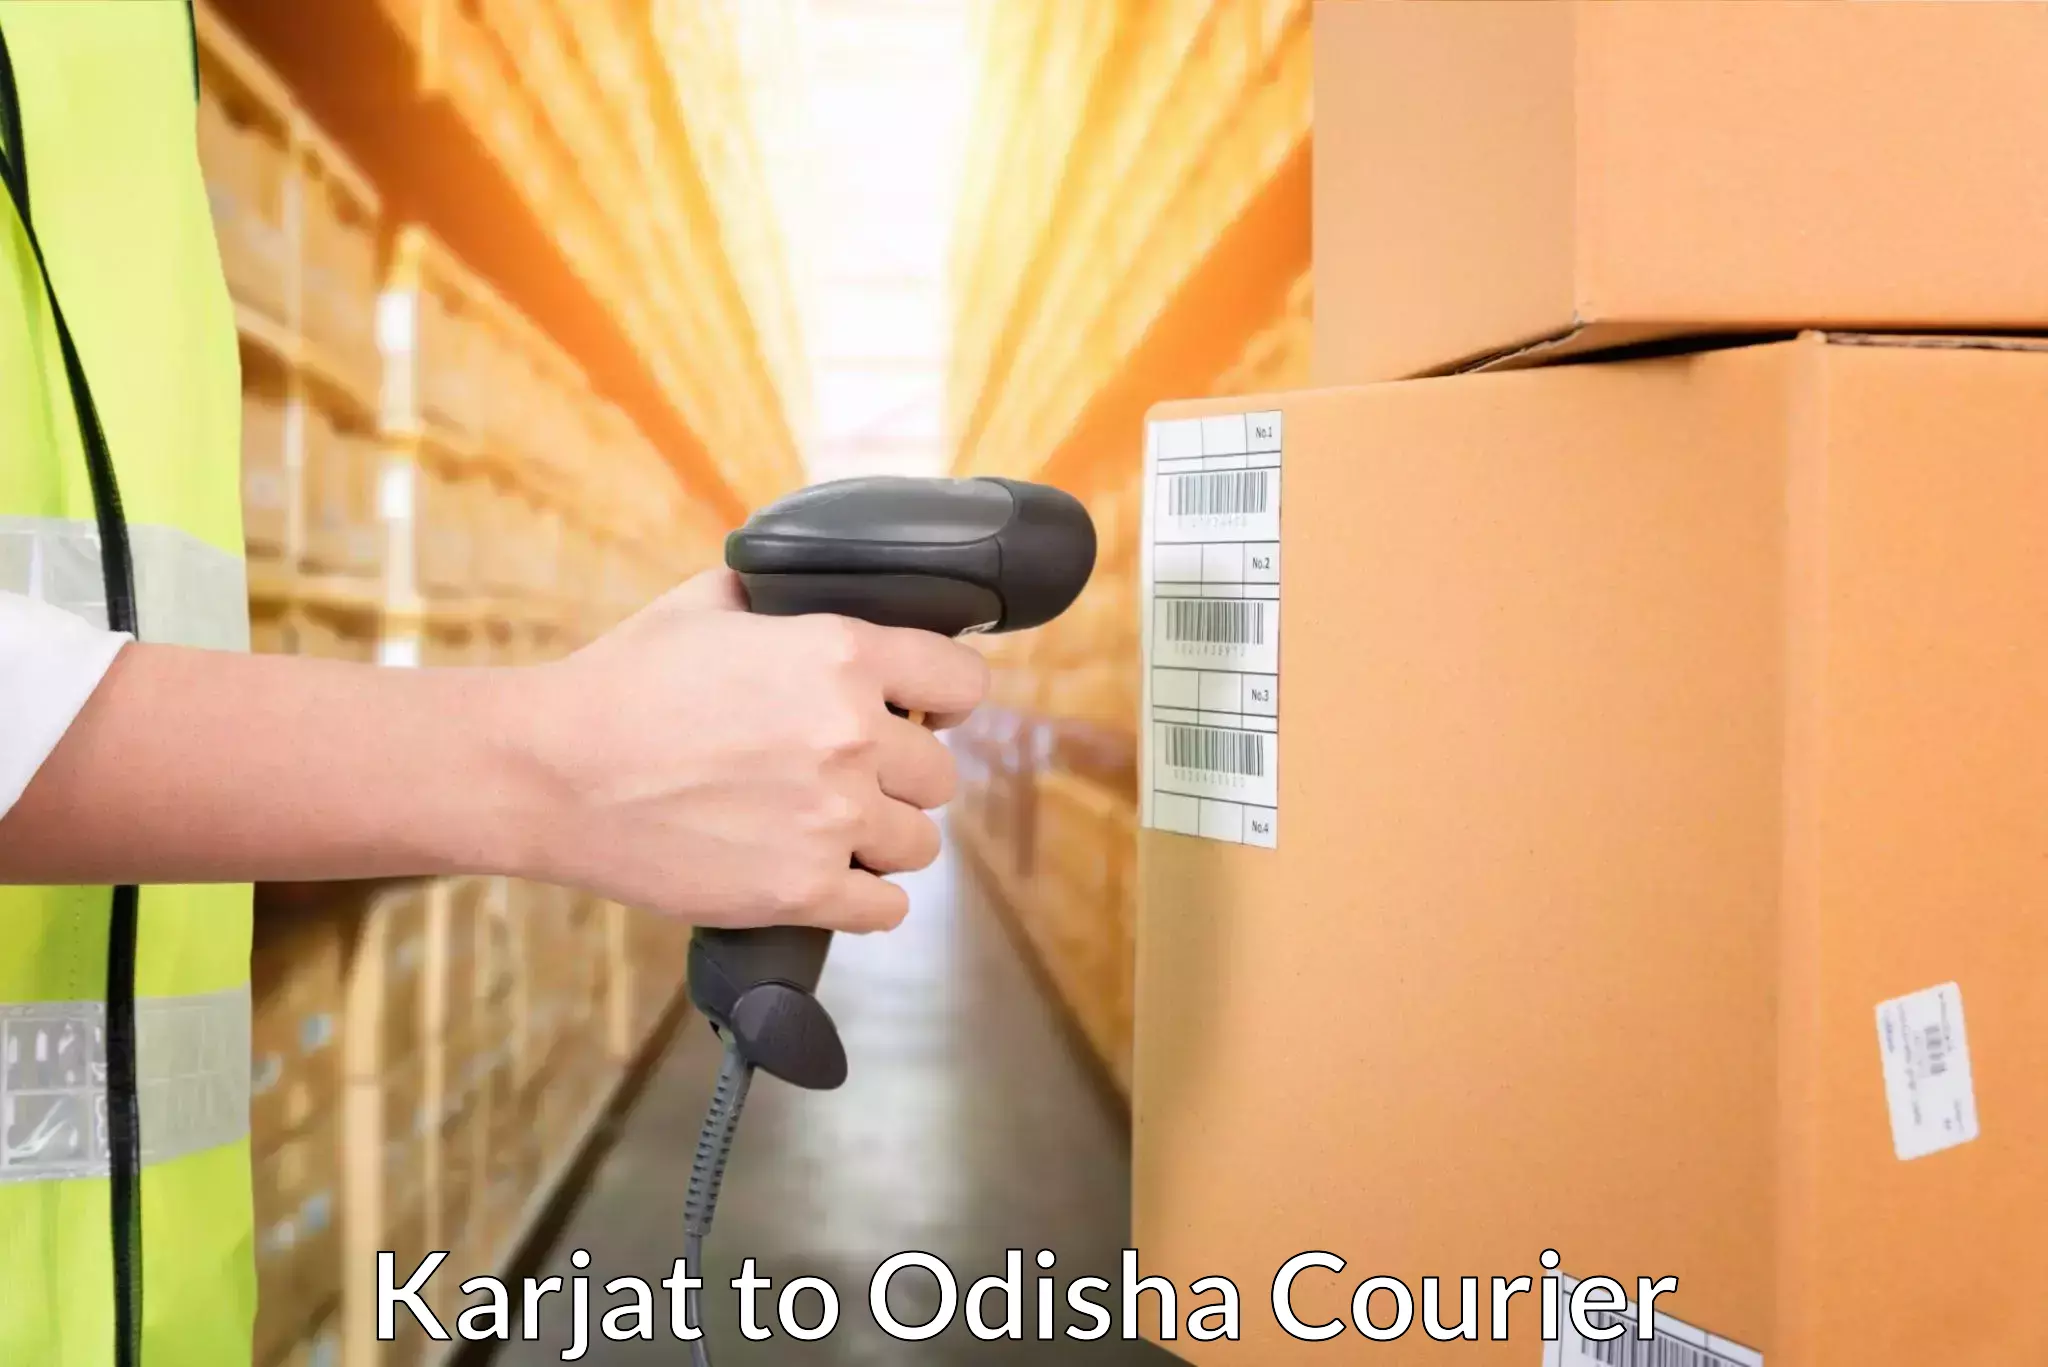 Online shipping calculator Karjat to Angul